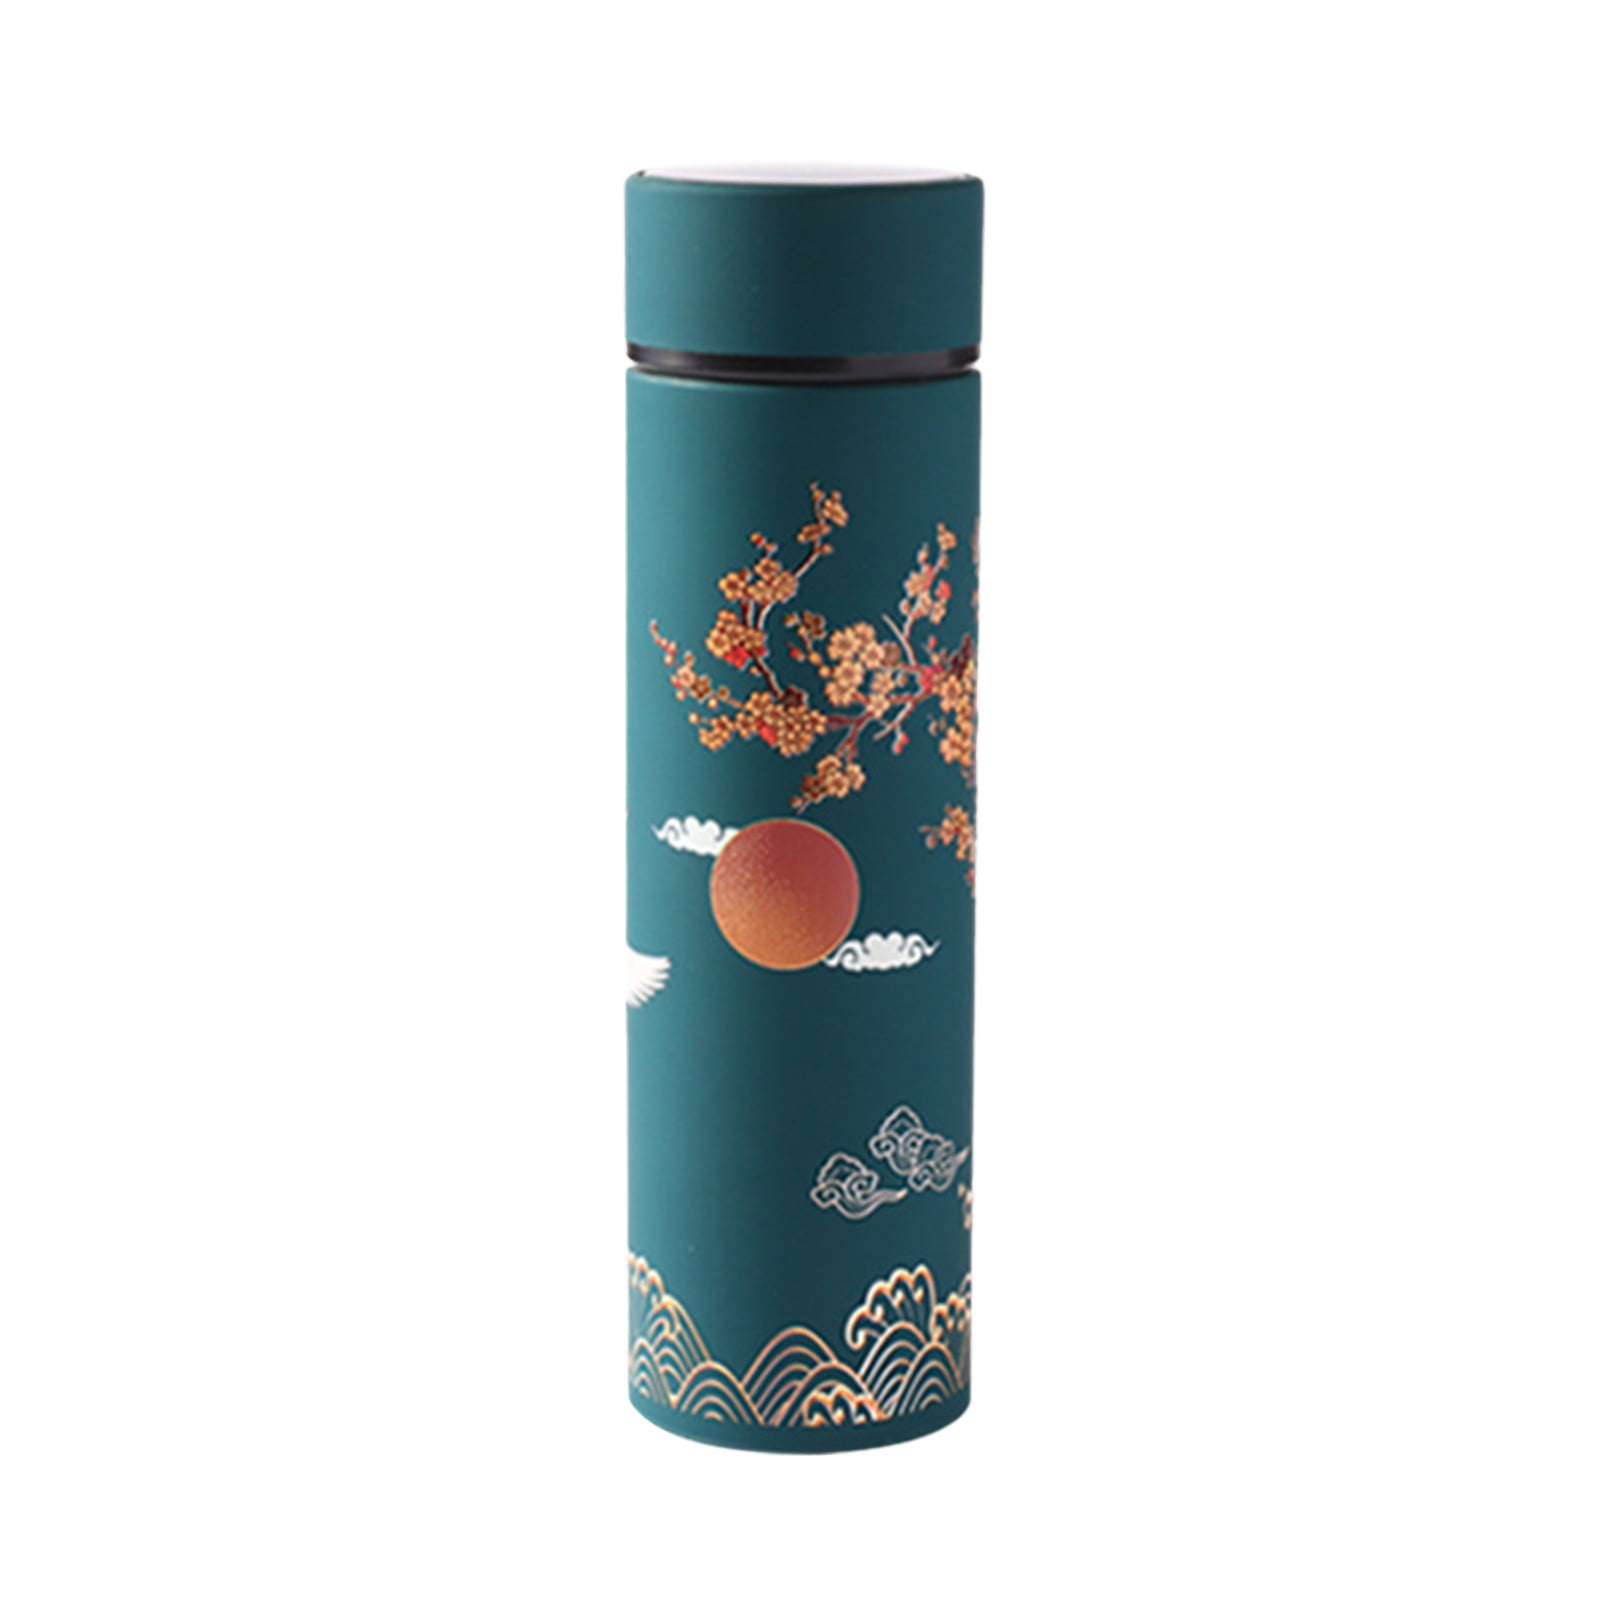  ULO DAZE 16oz Smart Water Bottle with Temperature